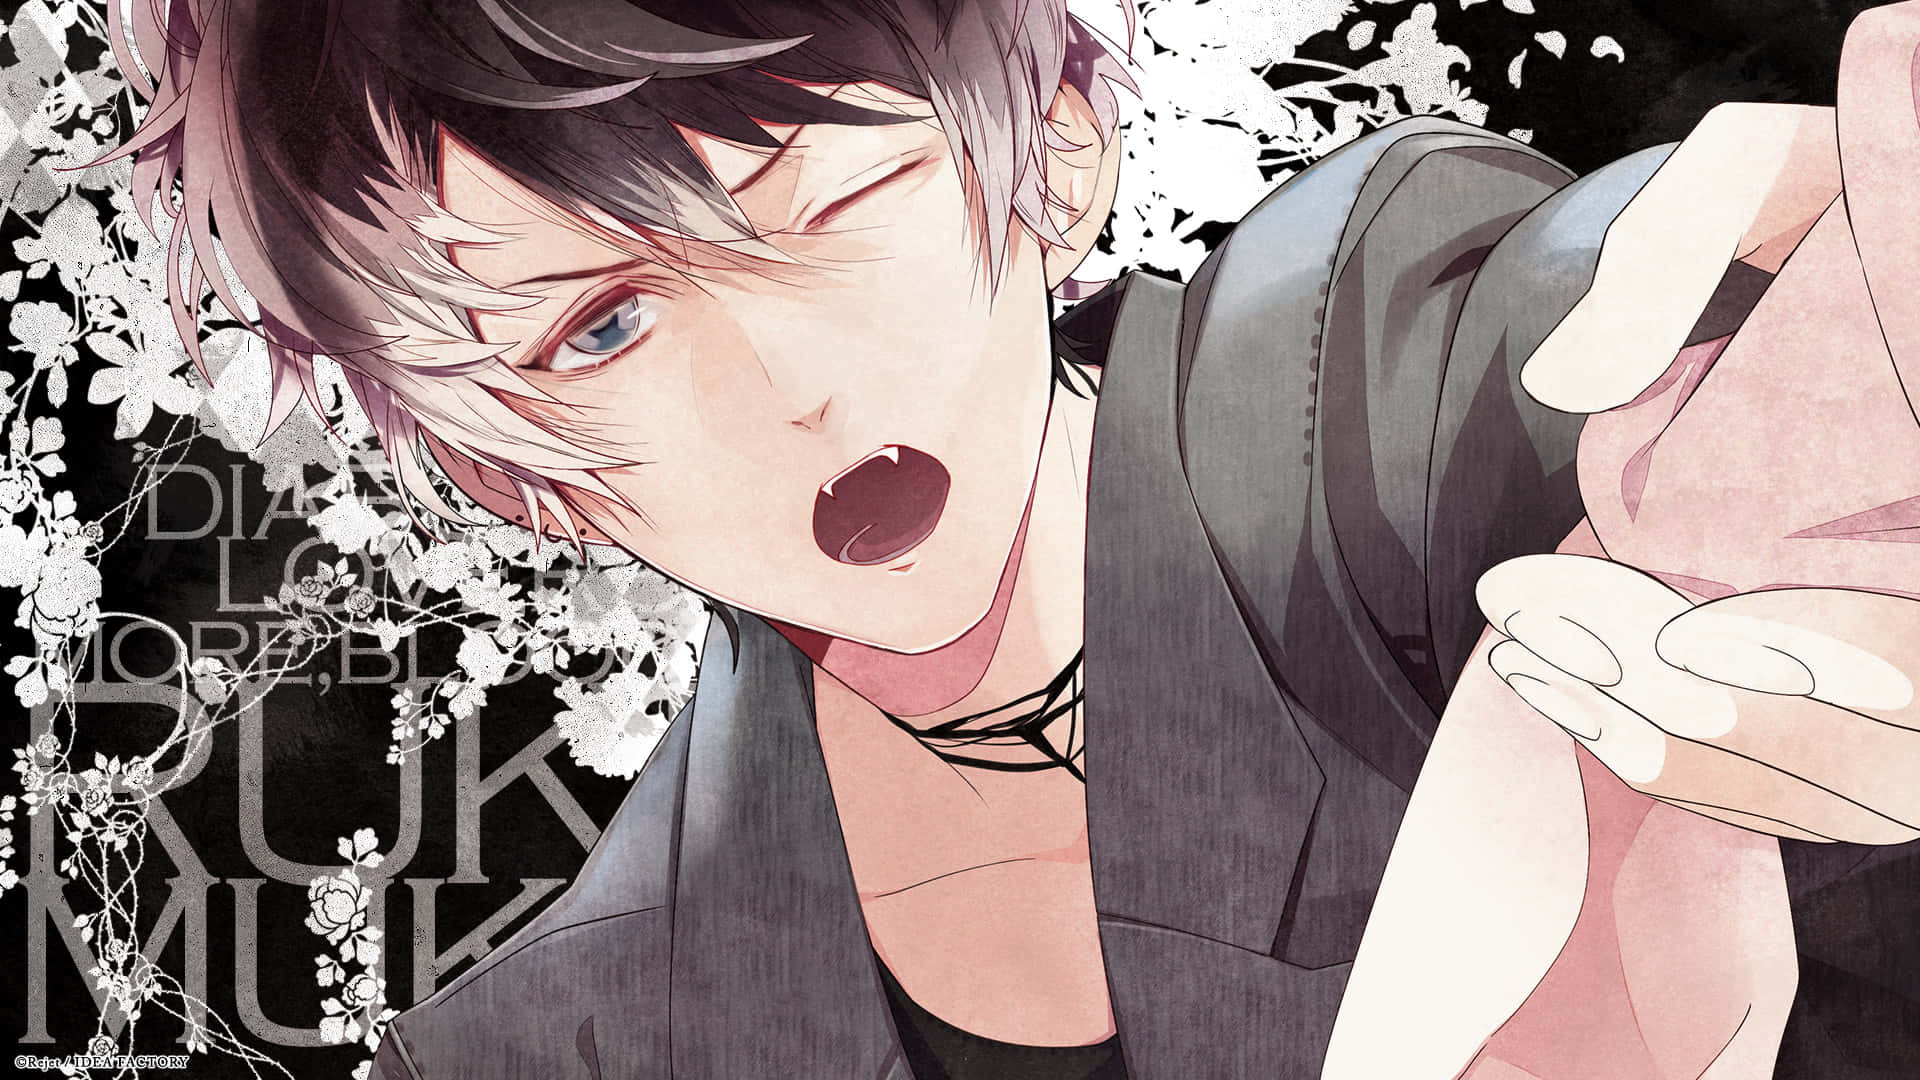 "Fall into temptation with the Diabolik Lovers"